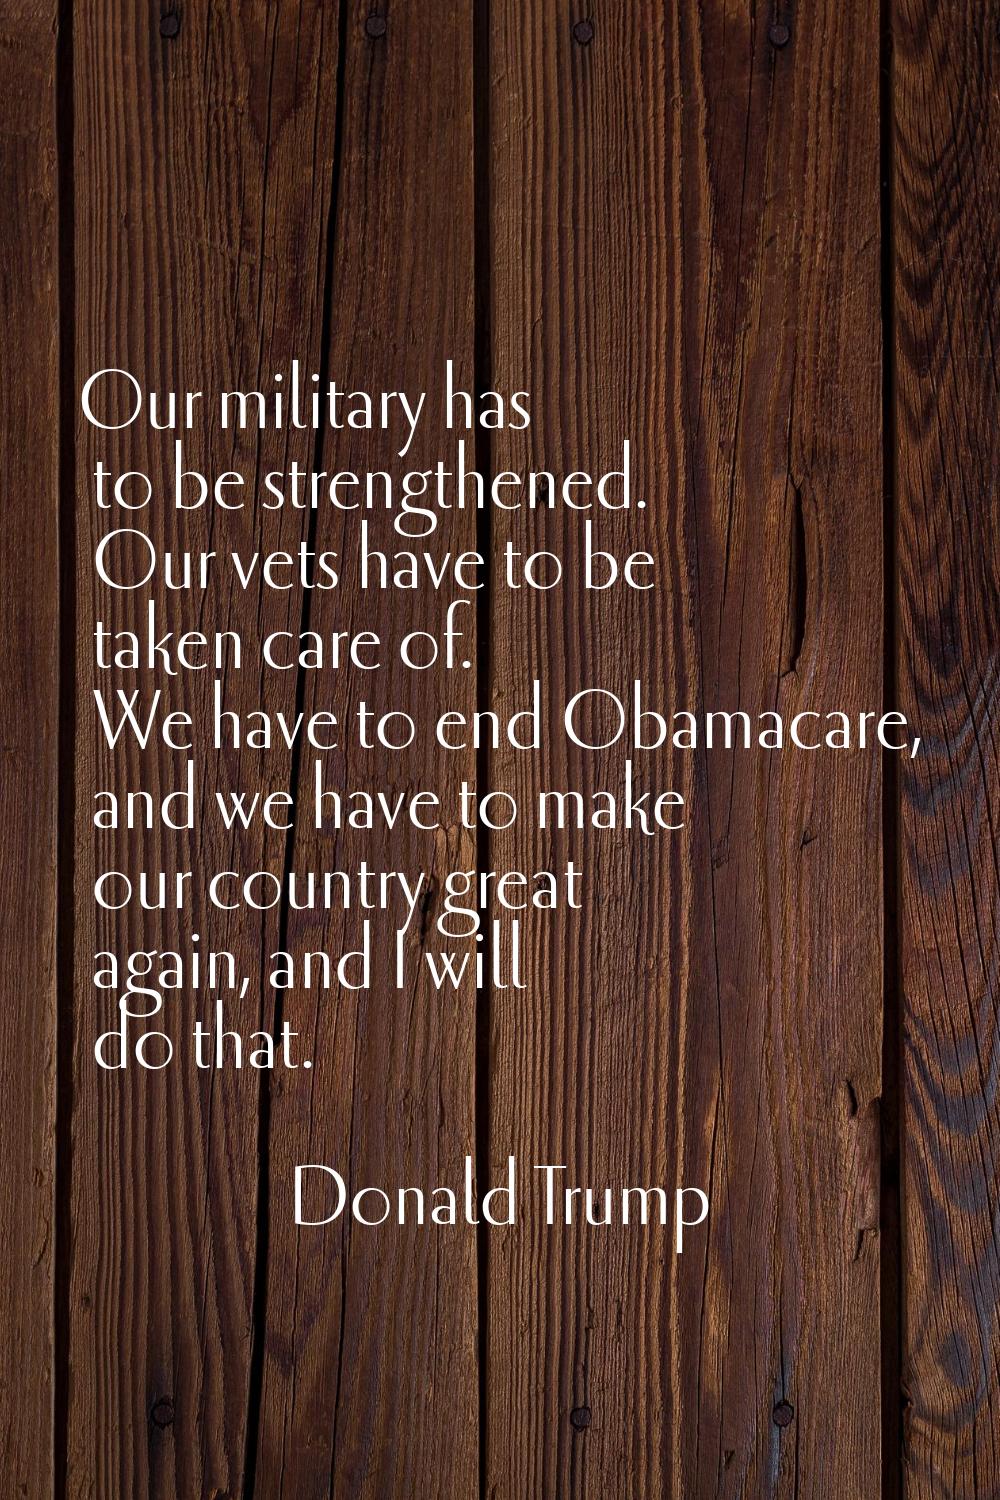 Our military has to be strengthened. Our vets have to be taken care of. We have to end Obamacare, a